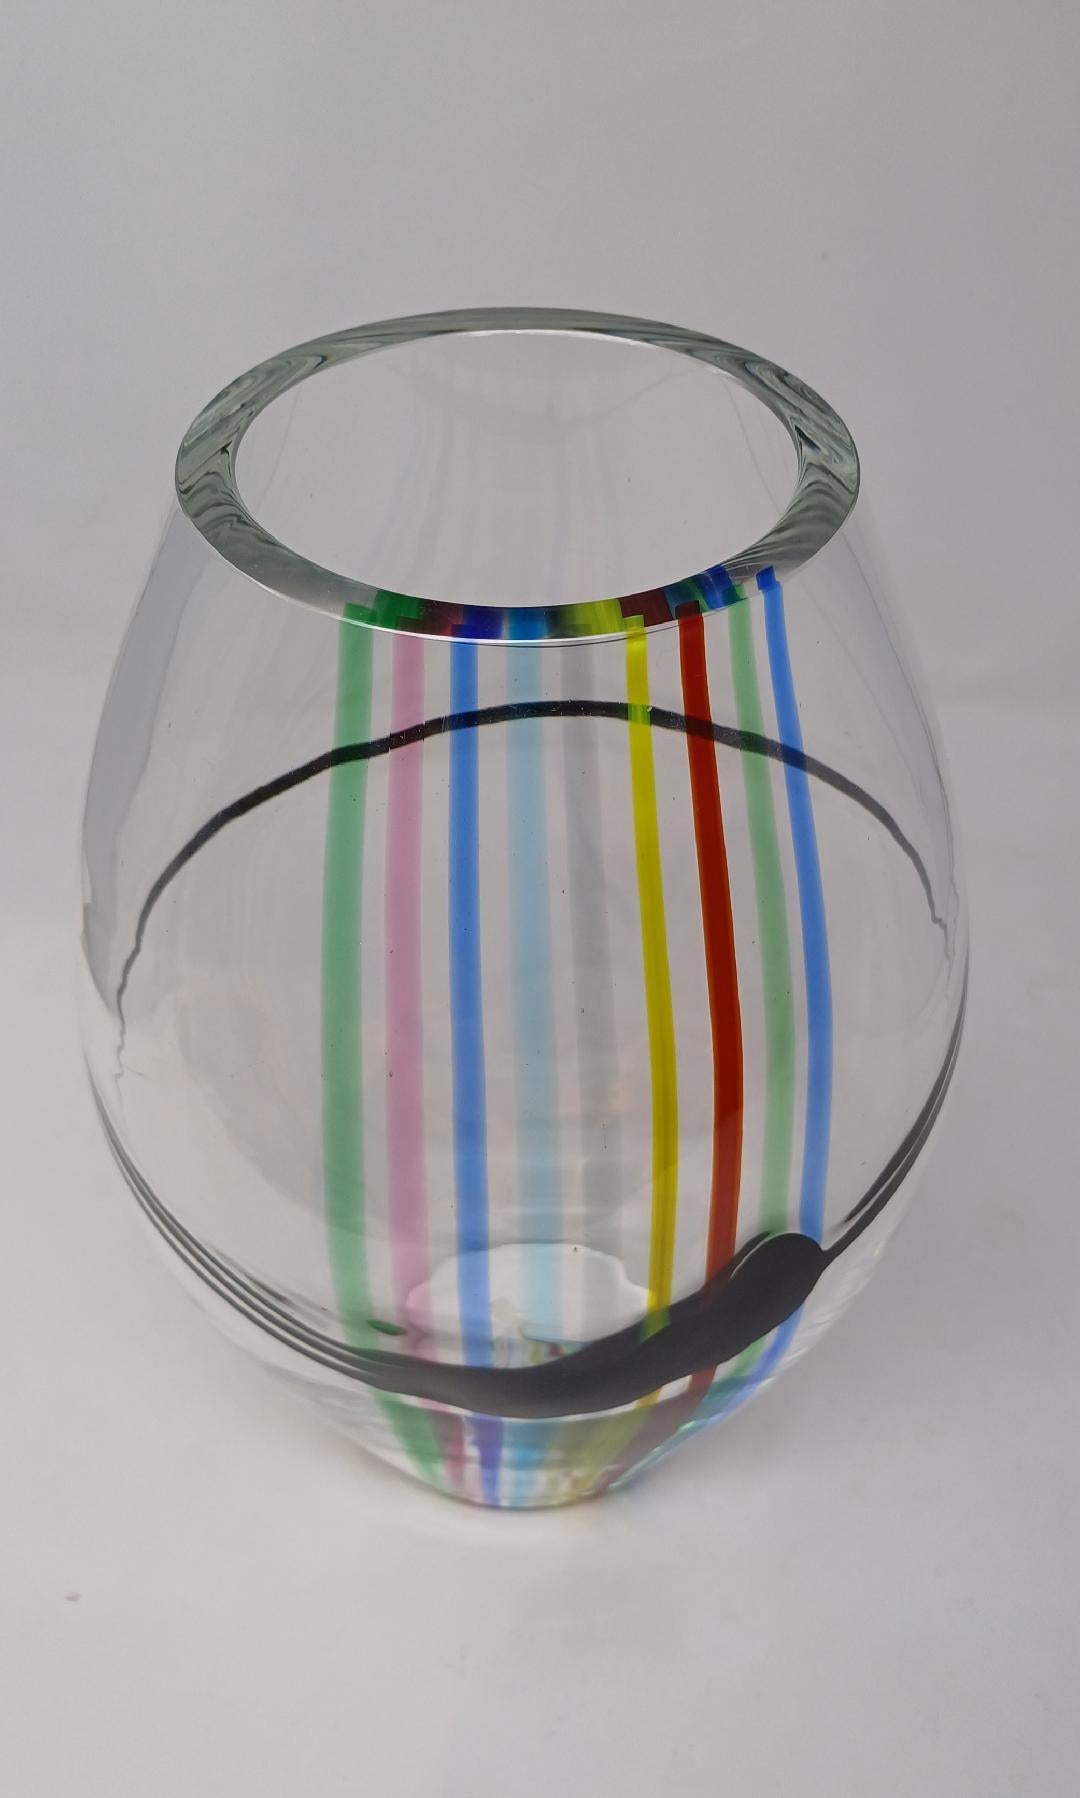 A 1970s vase with striated rainbow colors of blue, orange, pink, red, yellow and green; the thick clear glass bowl with layers of embedded colors. Created by Livio Seguso for Seguso AV.